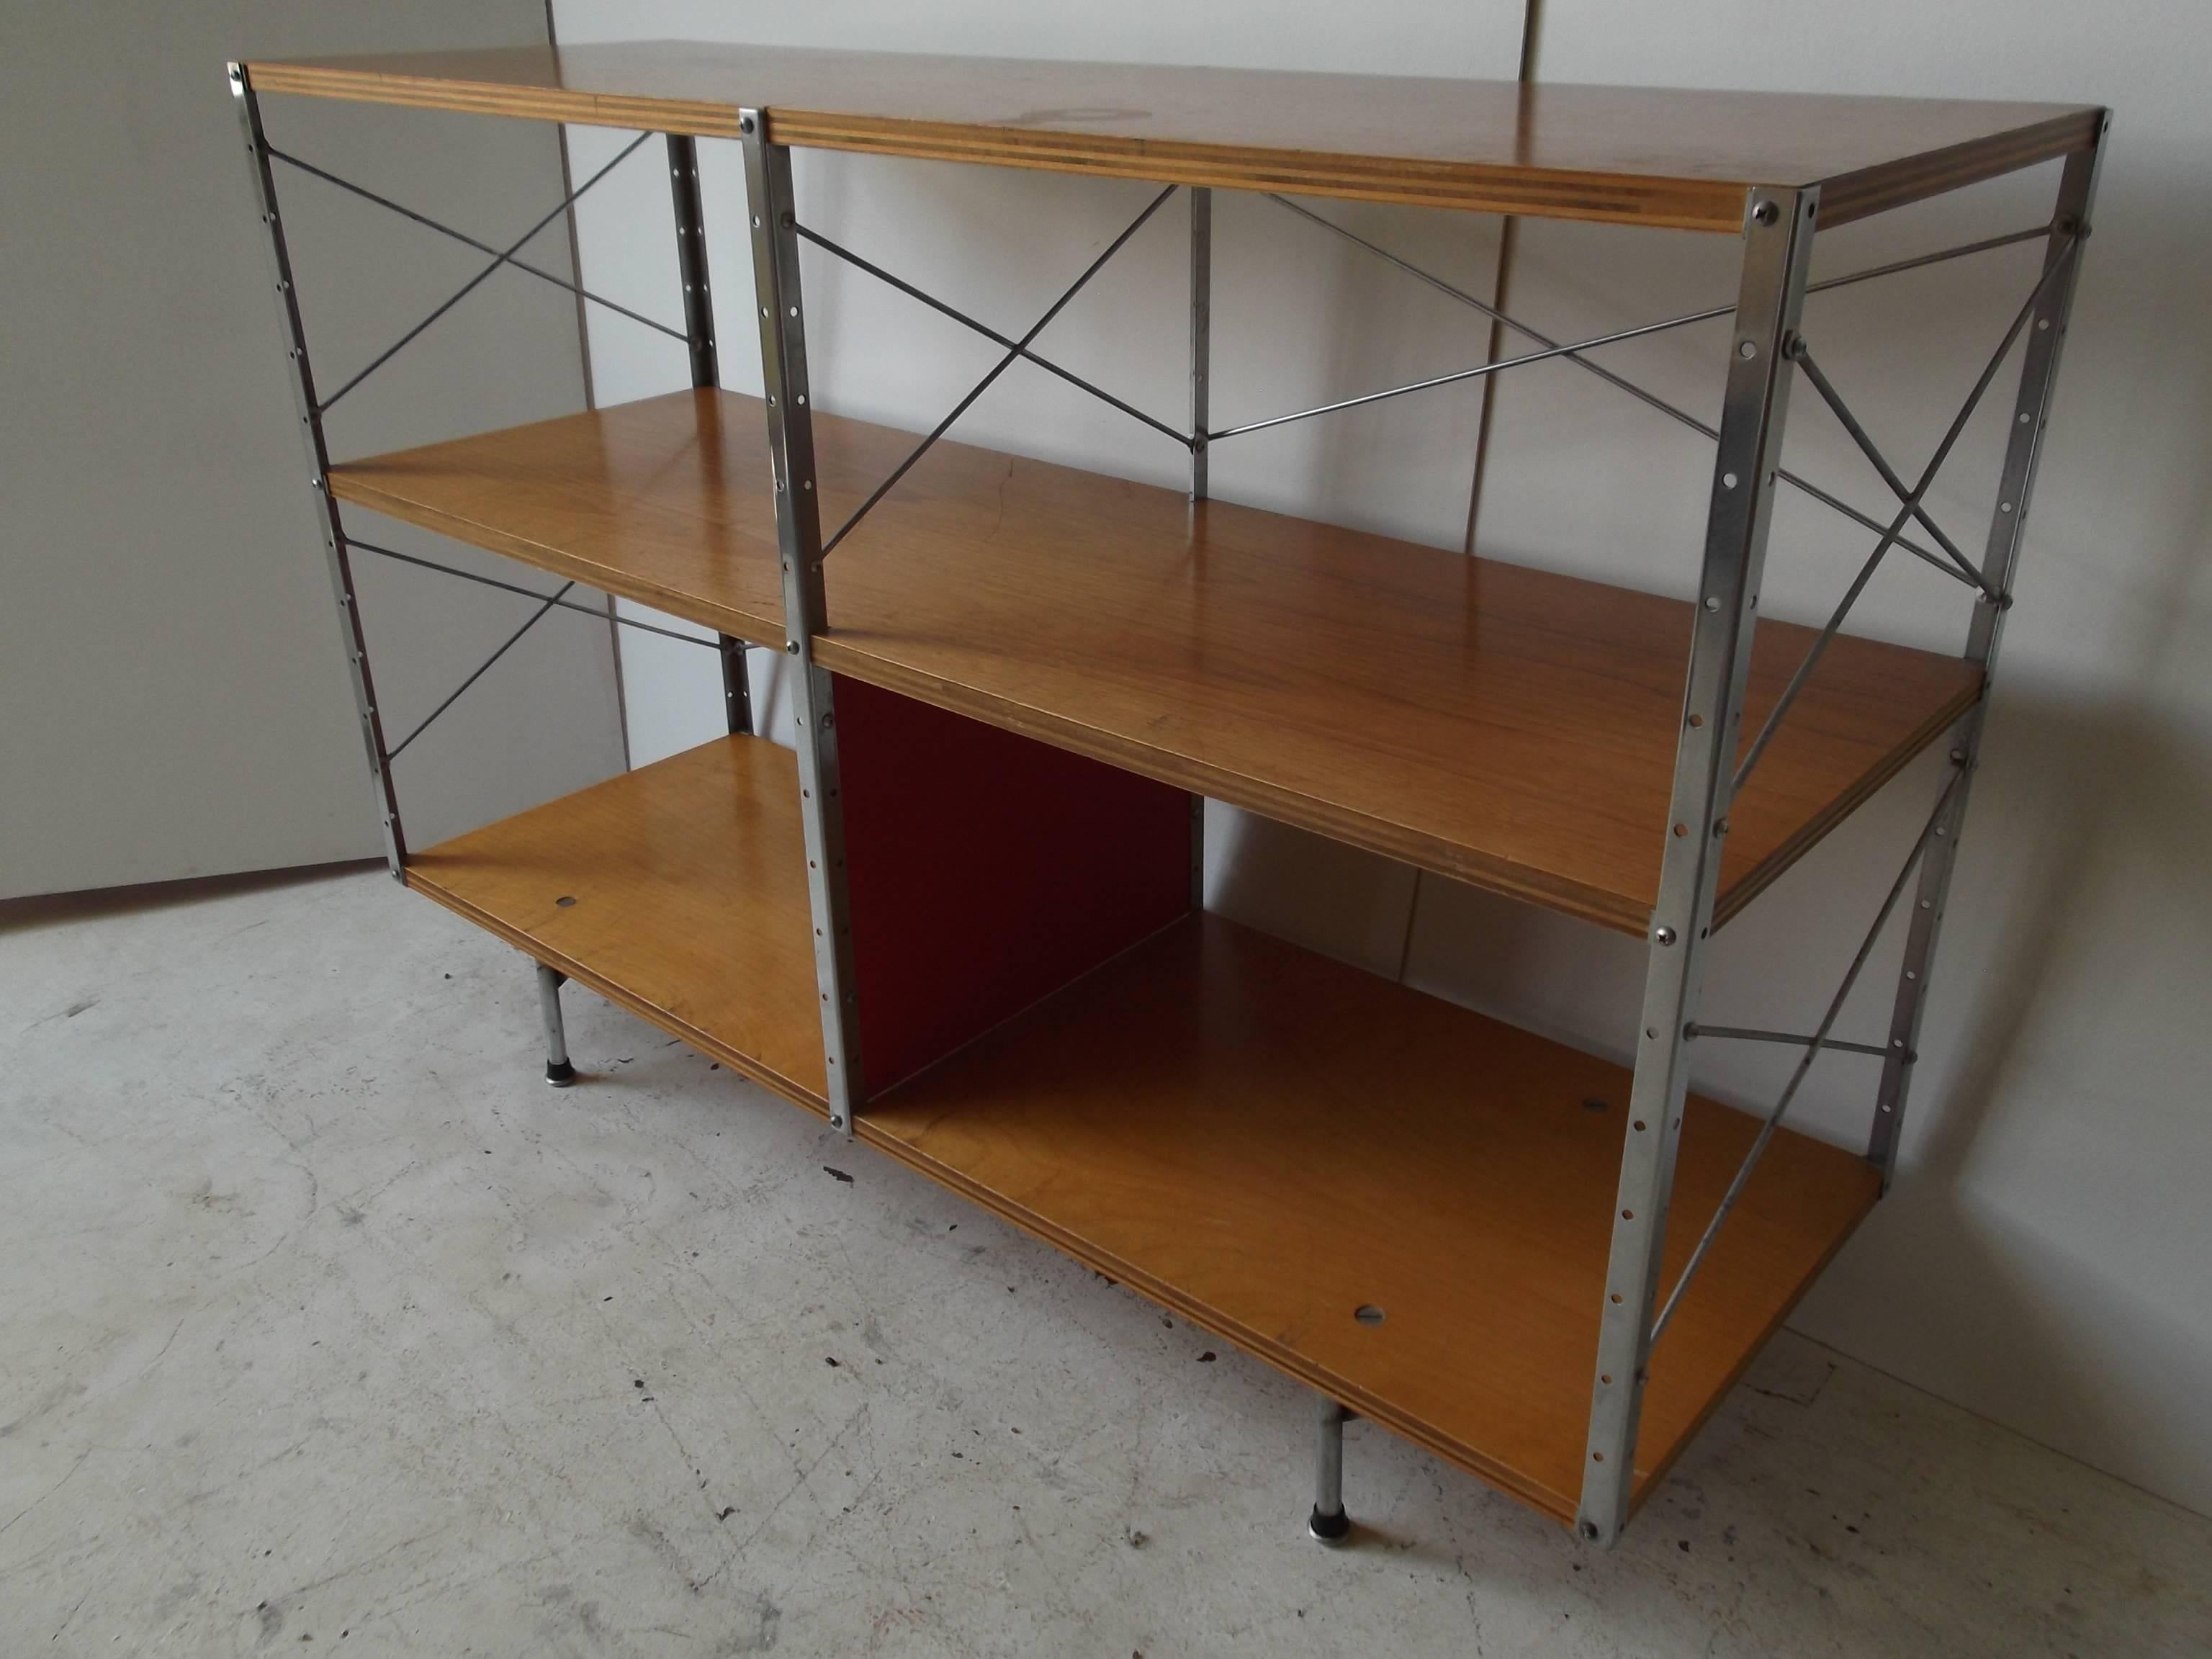 This is a great example of an original Charles Eames Storage Unit for Herman Miller. It has 2nd series feet. There is one bright red panel to the bottom center. The top and middle shelves are beautiful veneer walnut on plywood, with the bottom in